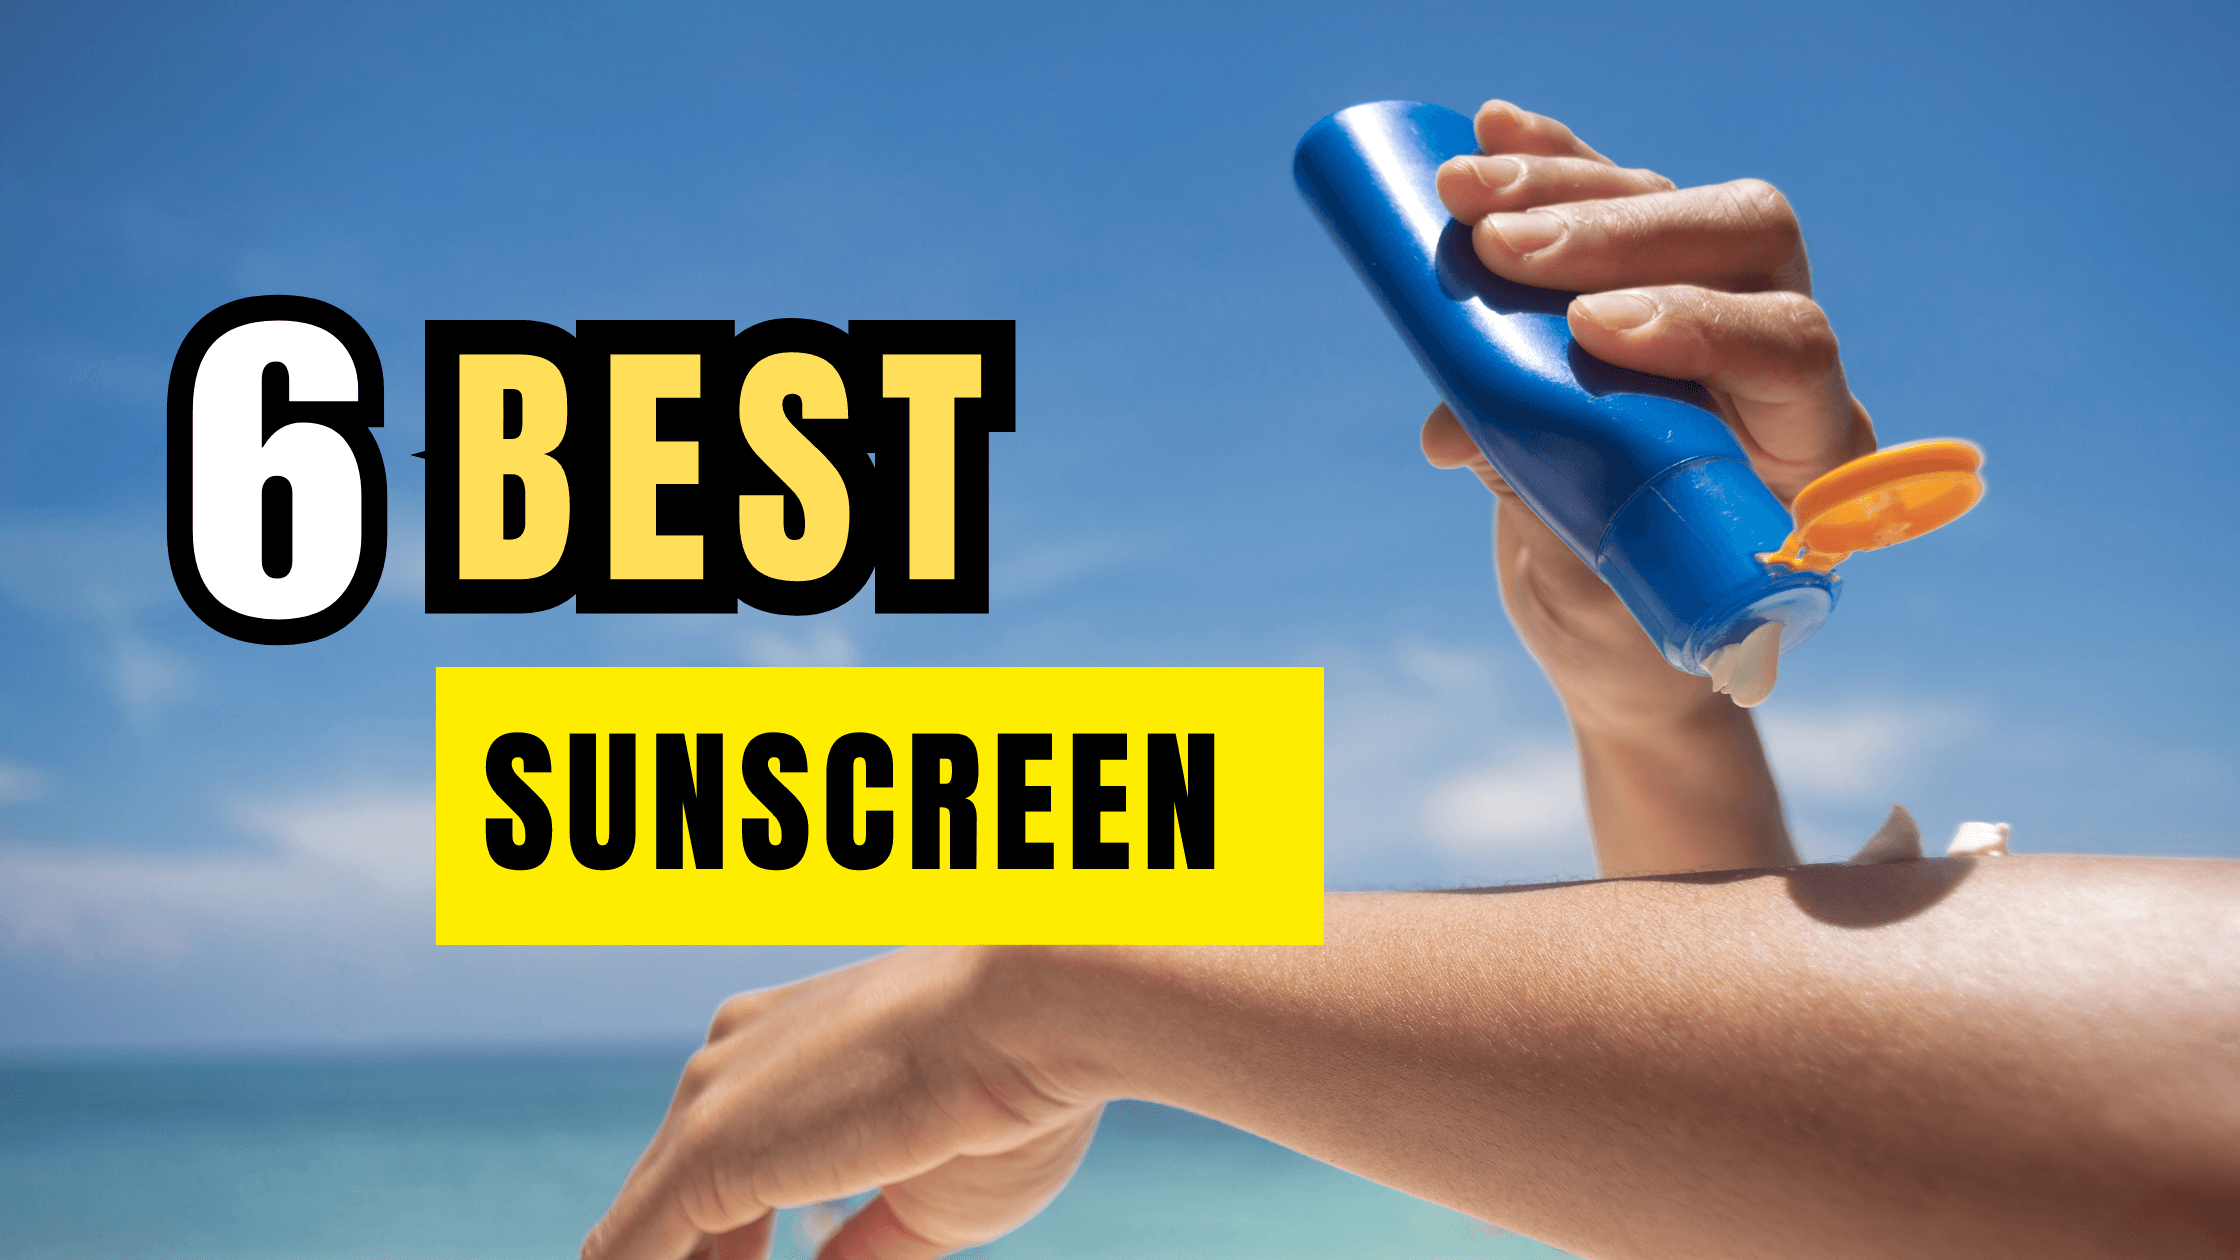 6 Best Sunscreen in india